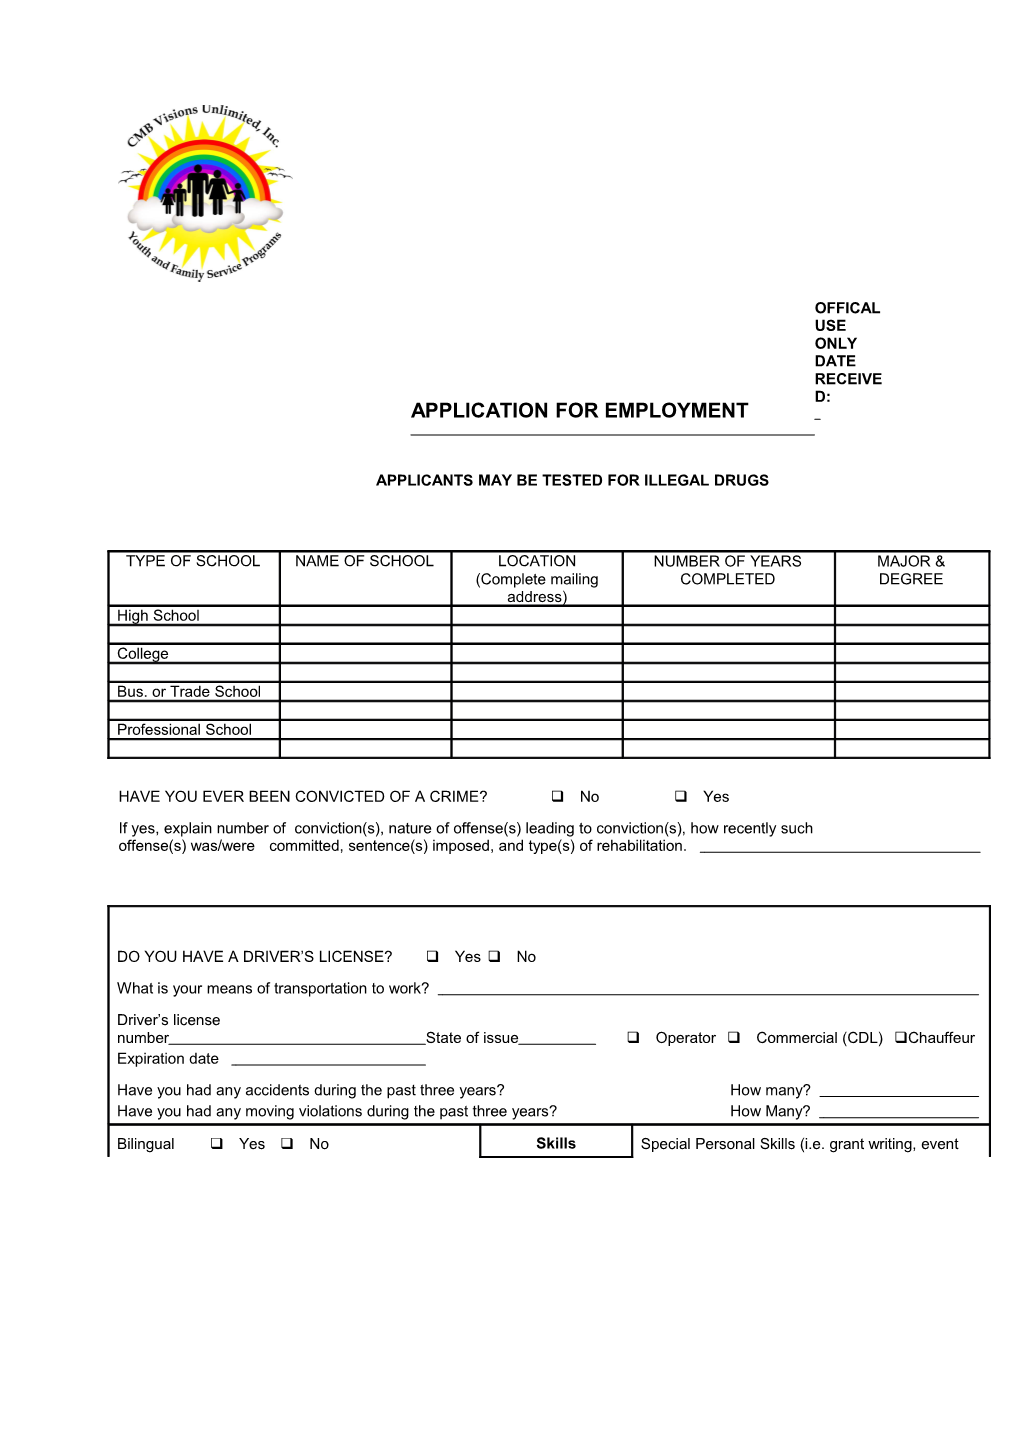 Sample Employment Application Form s1